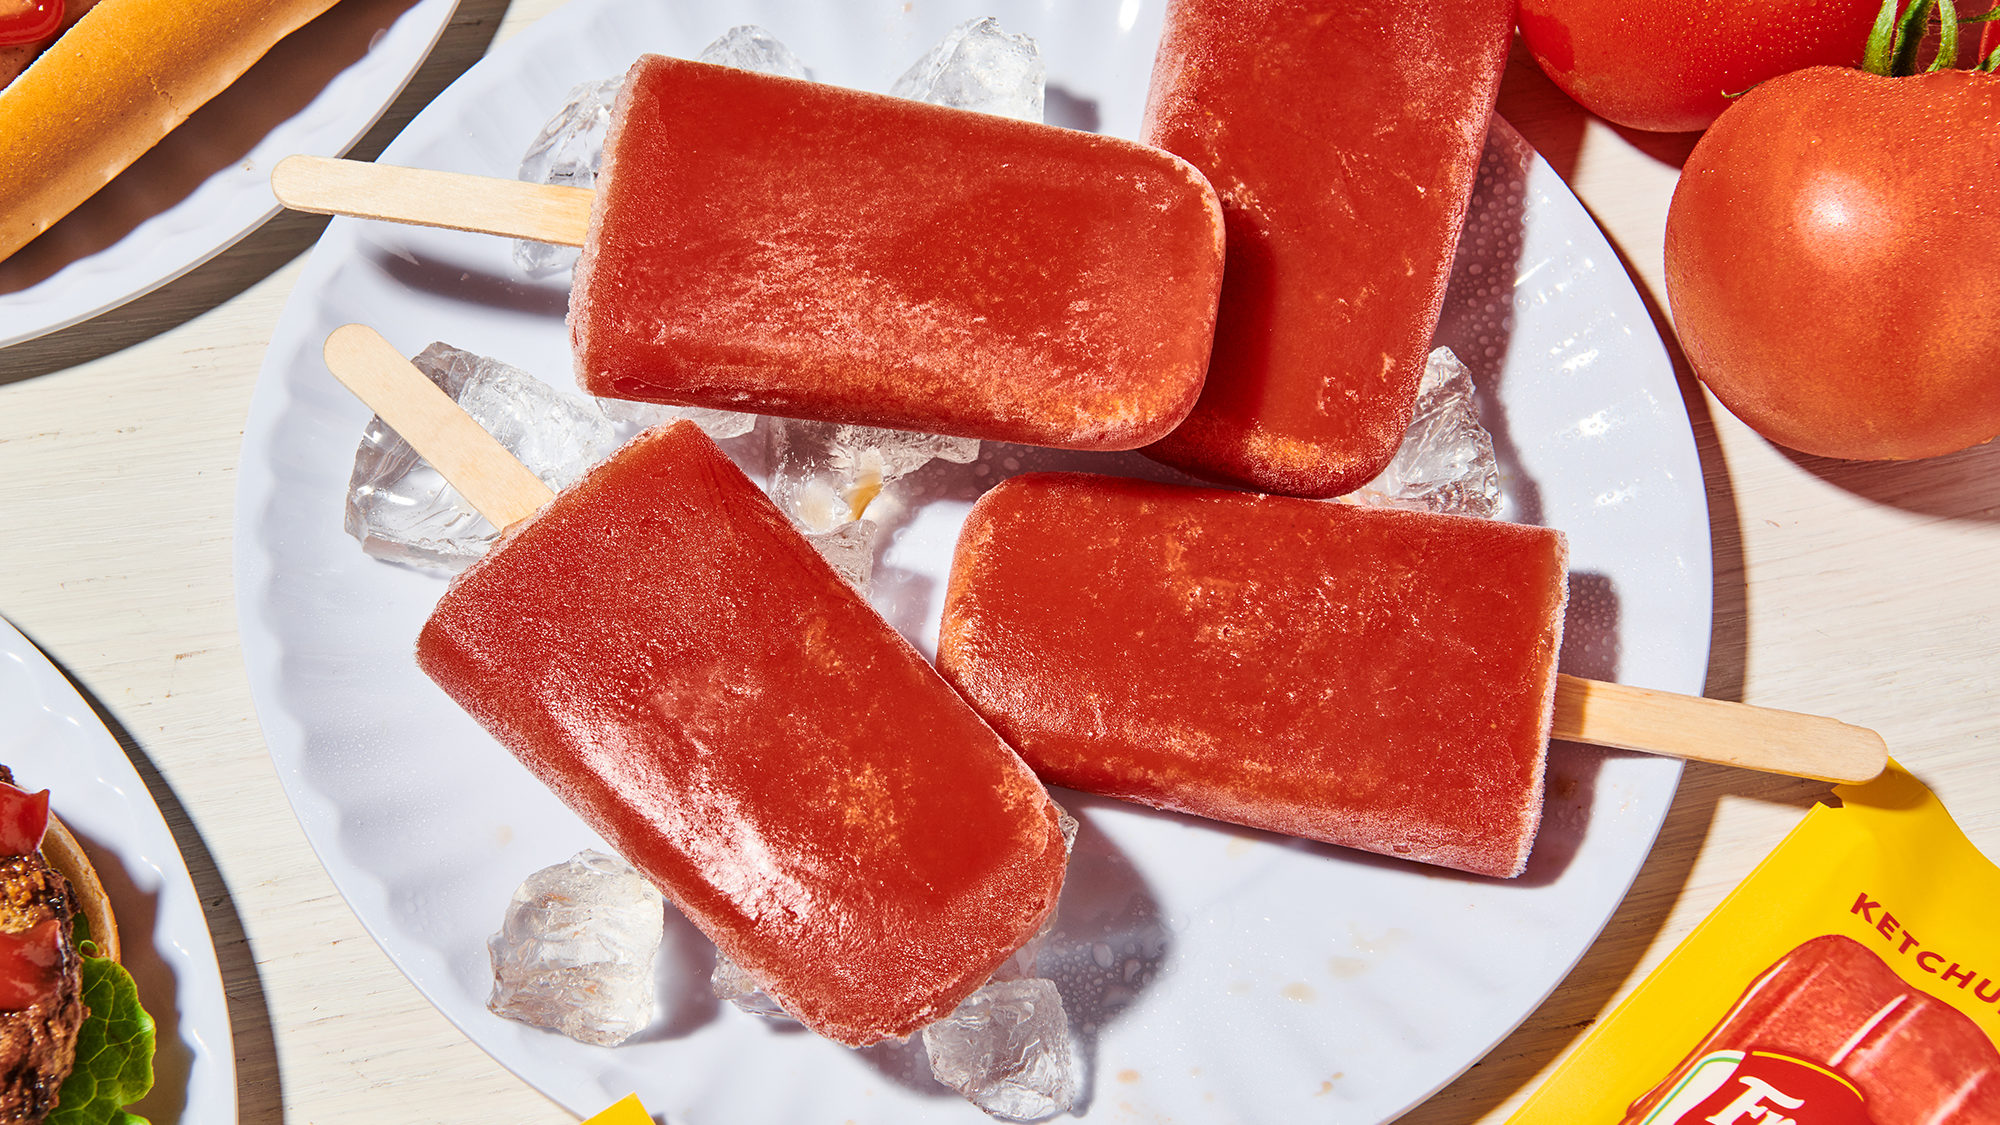 Image of the new summer treat: Ketchup-flavored popsicles (Photo courtesy of French's)...